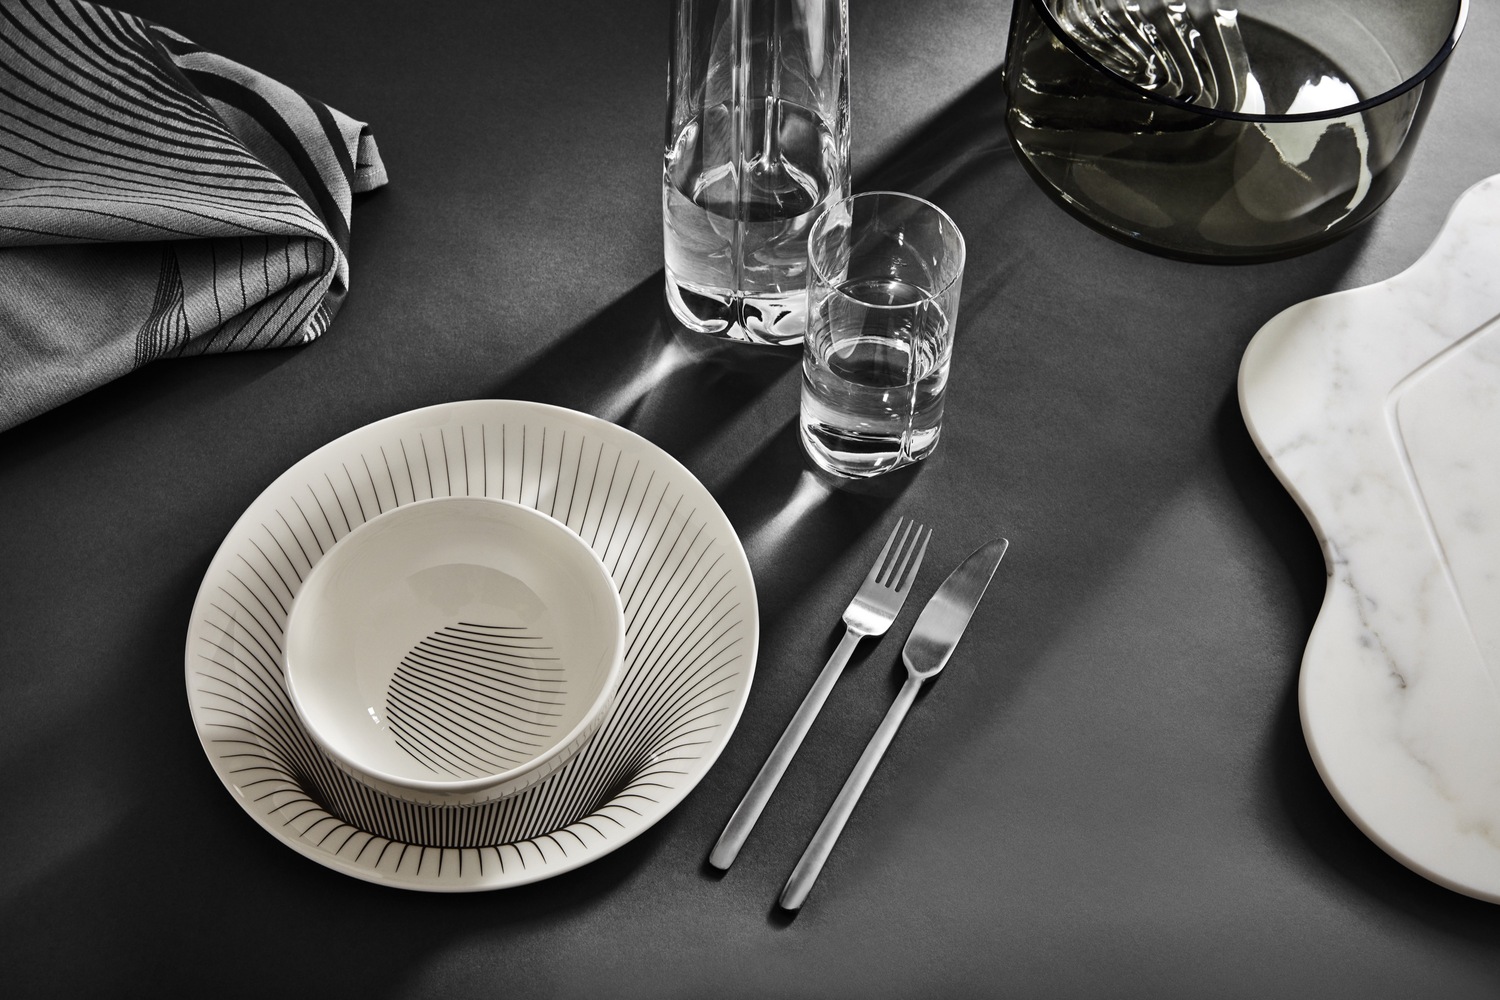 Porcelain bowls featured in Zaha Hadid Design's new kitchenware collection.